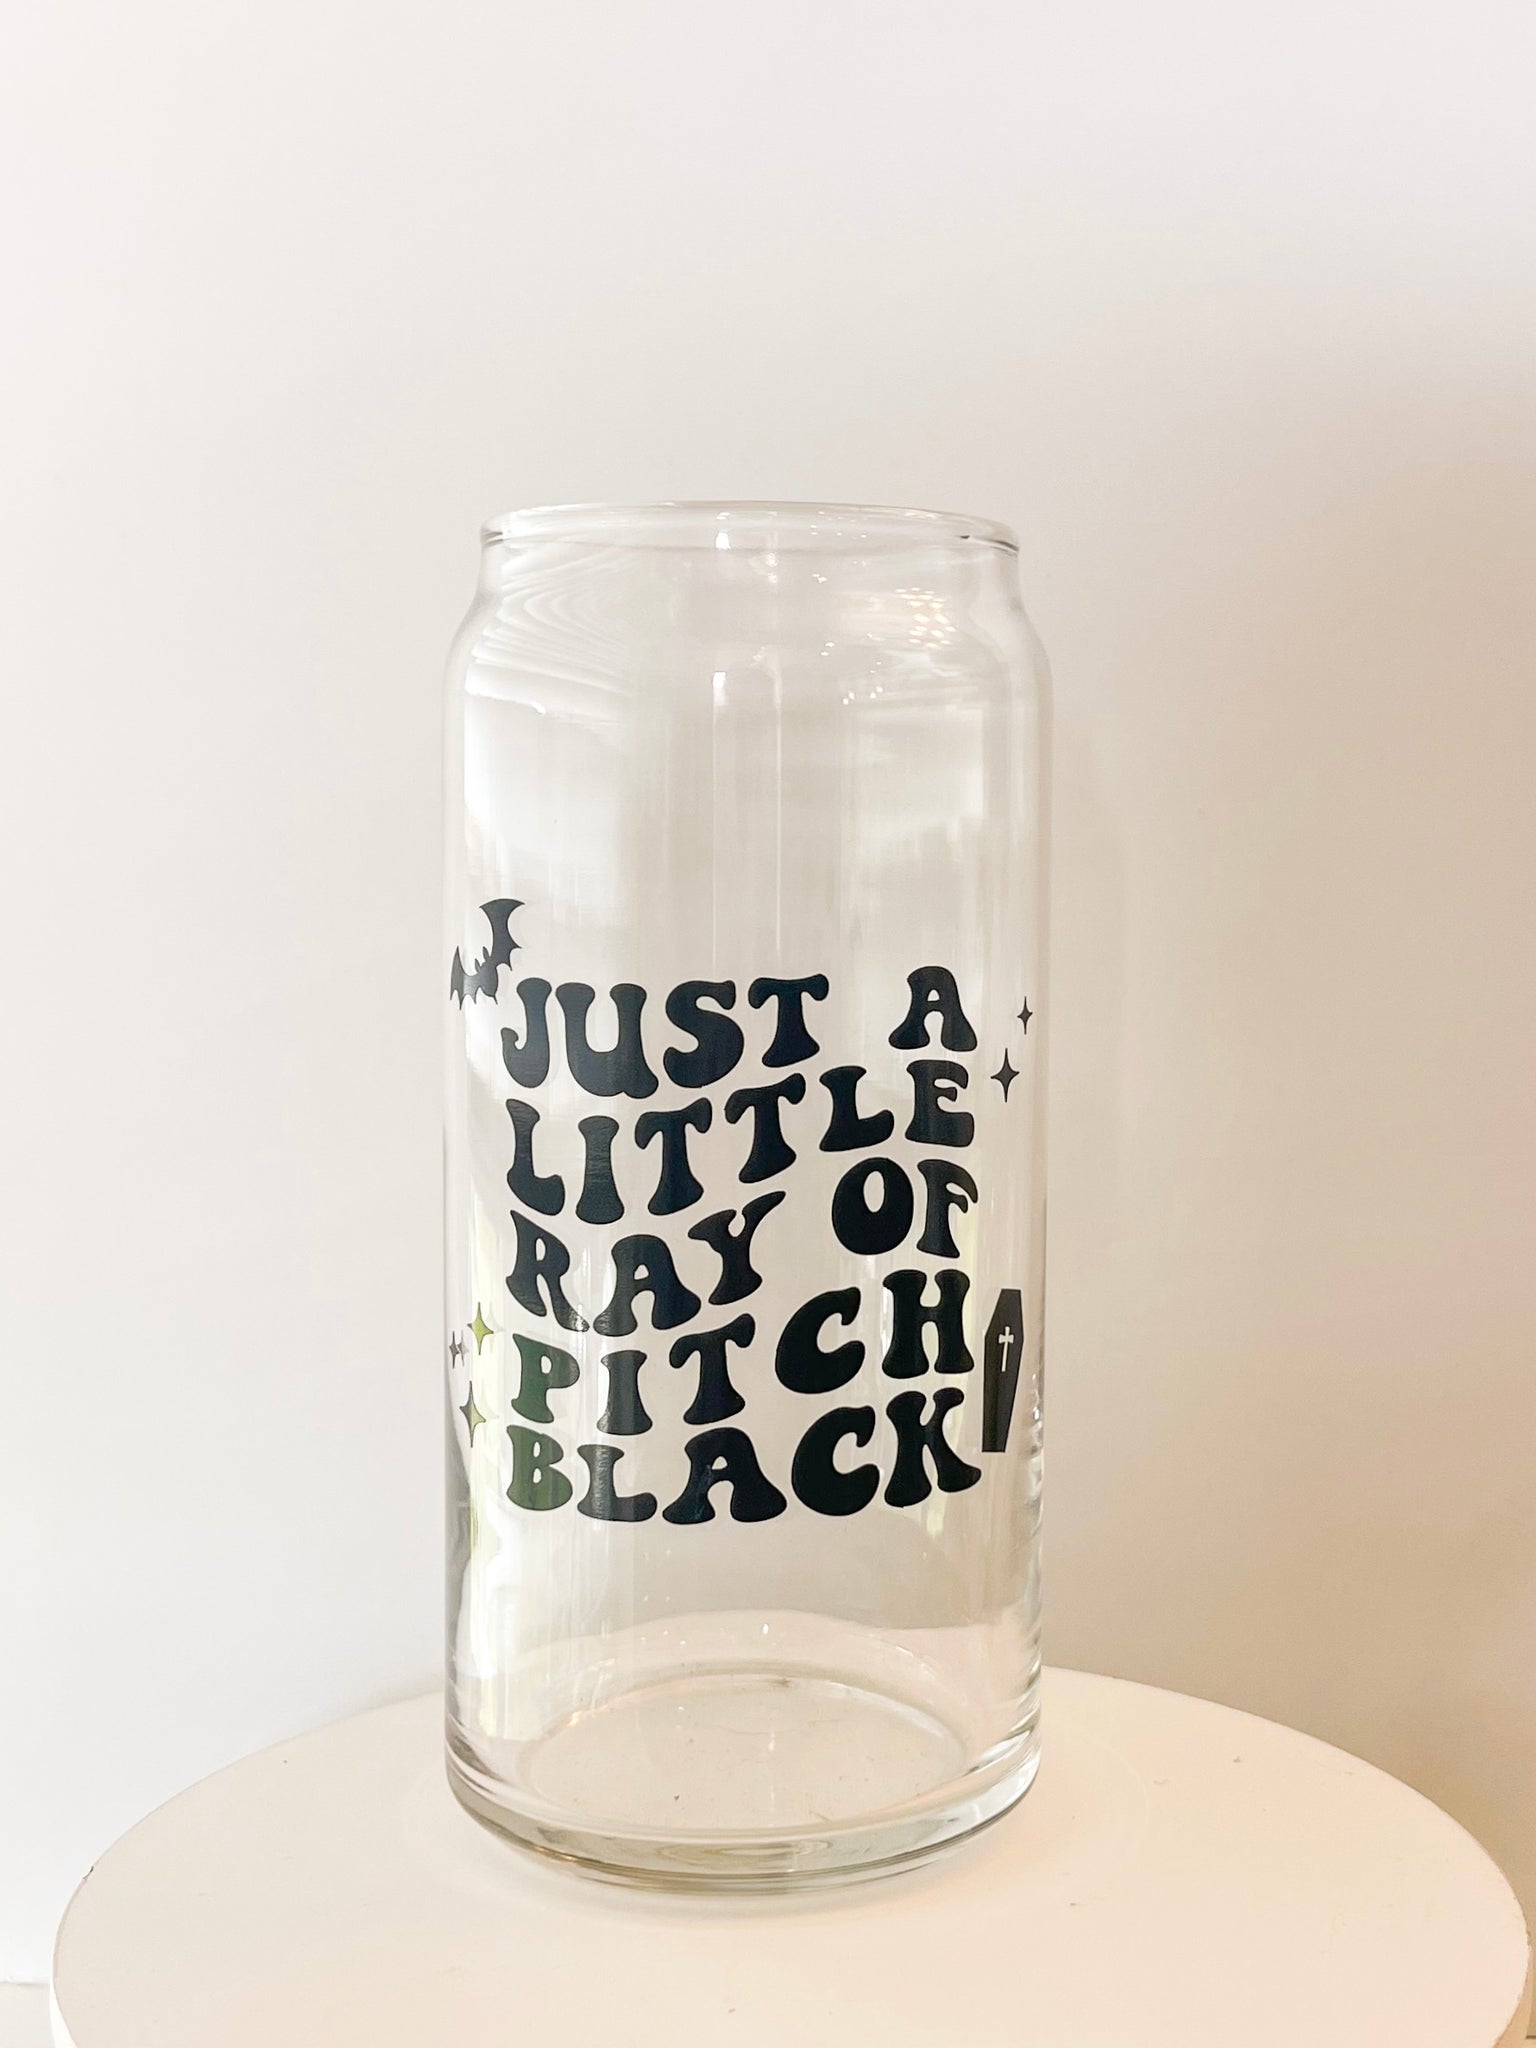 20 oz Ray of Pitch Black Can Glass